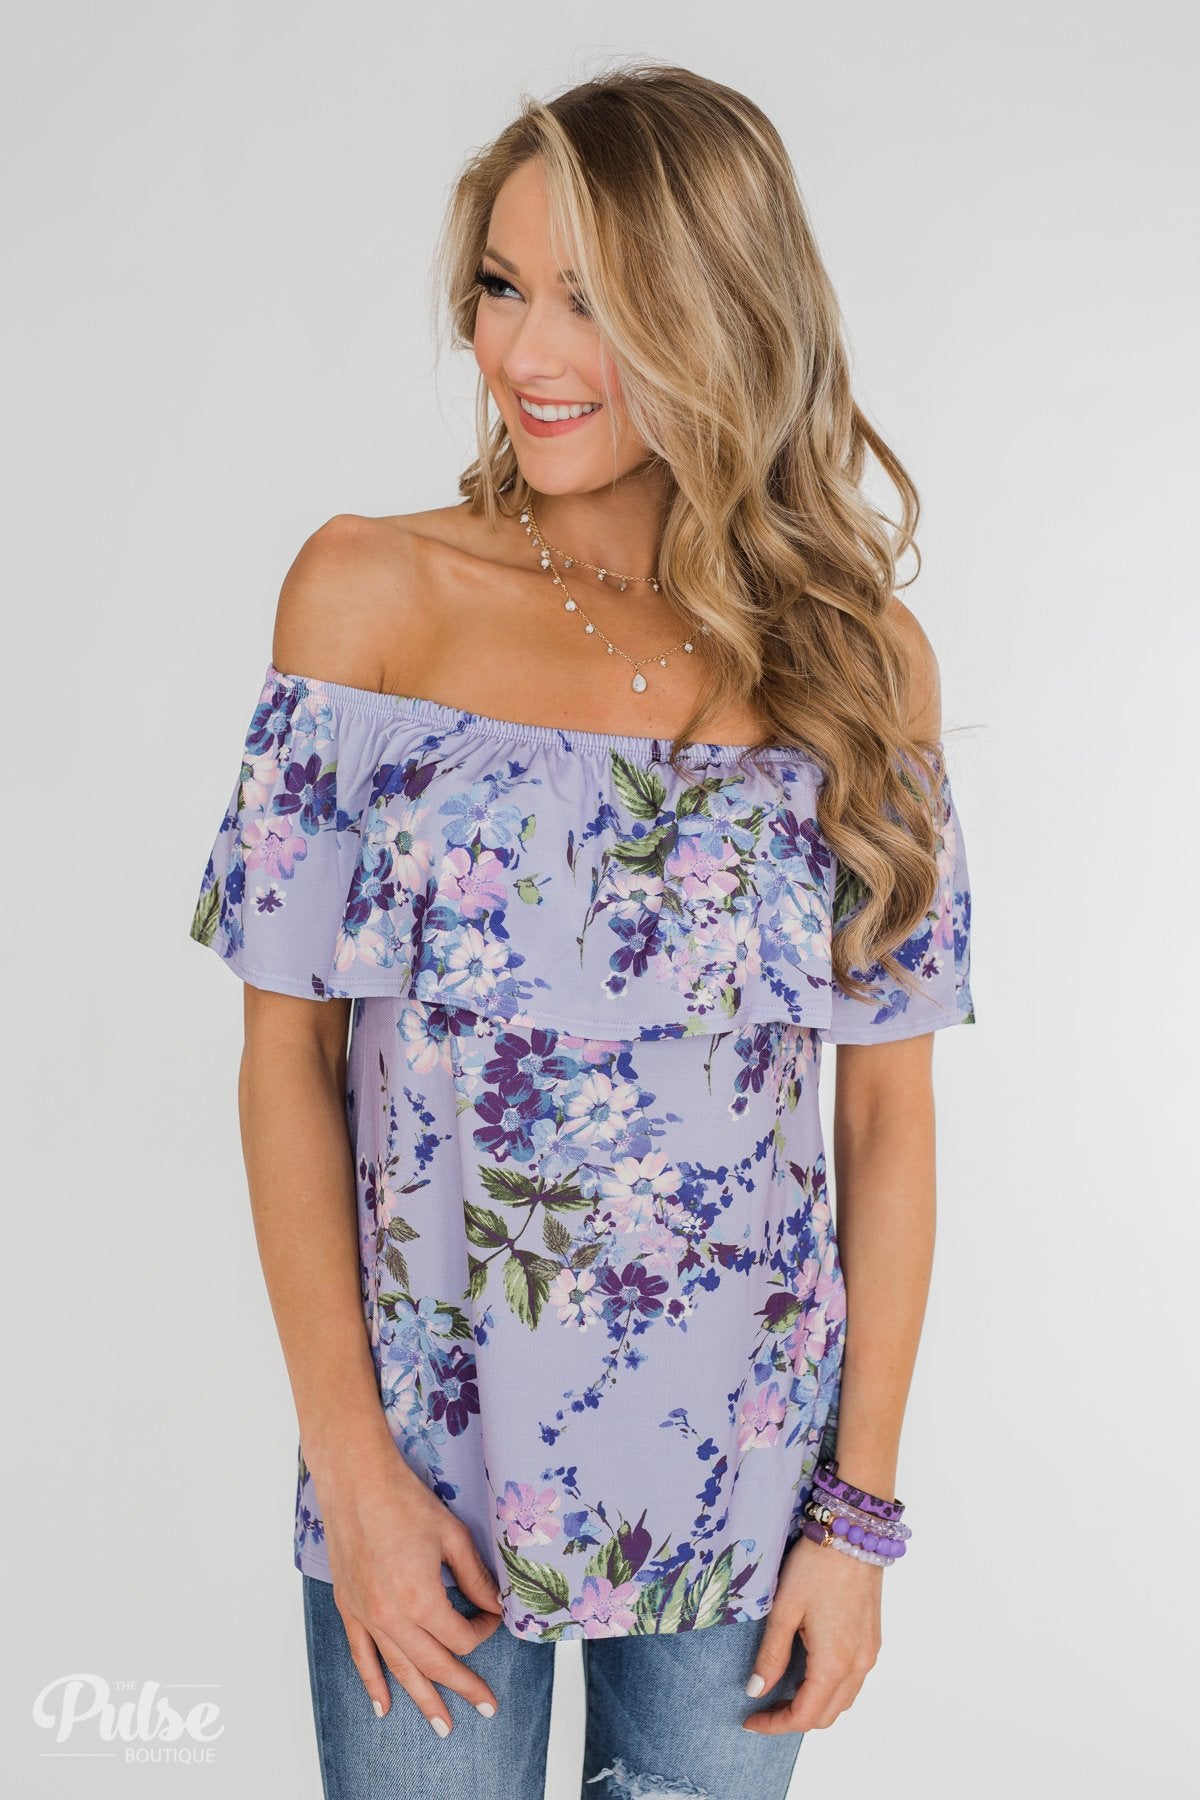 Grow With Me Off the Shoulder Floral Top- Light Violet – The Pulse Boutique